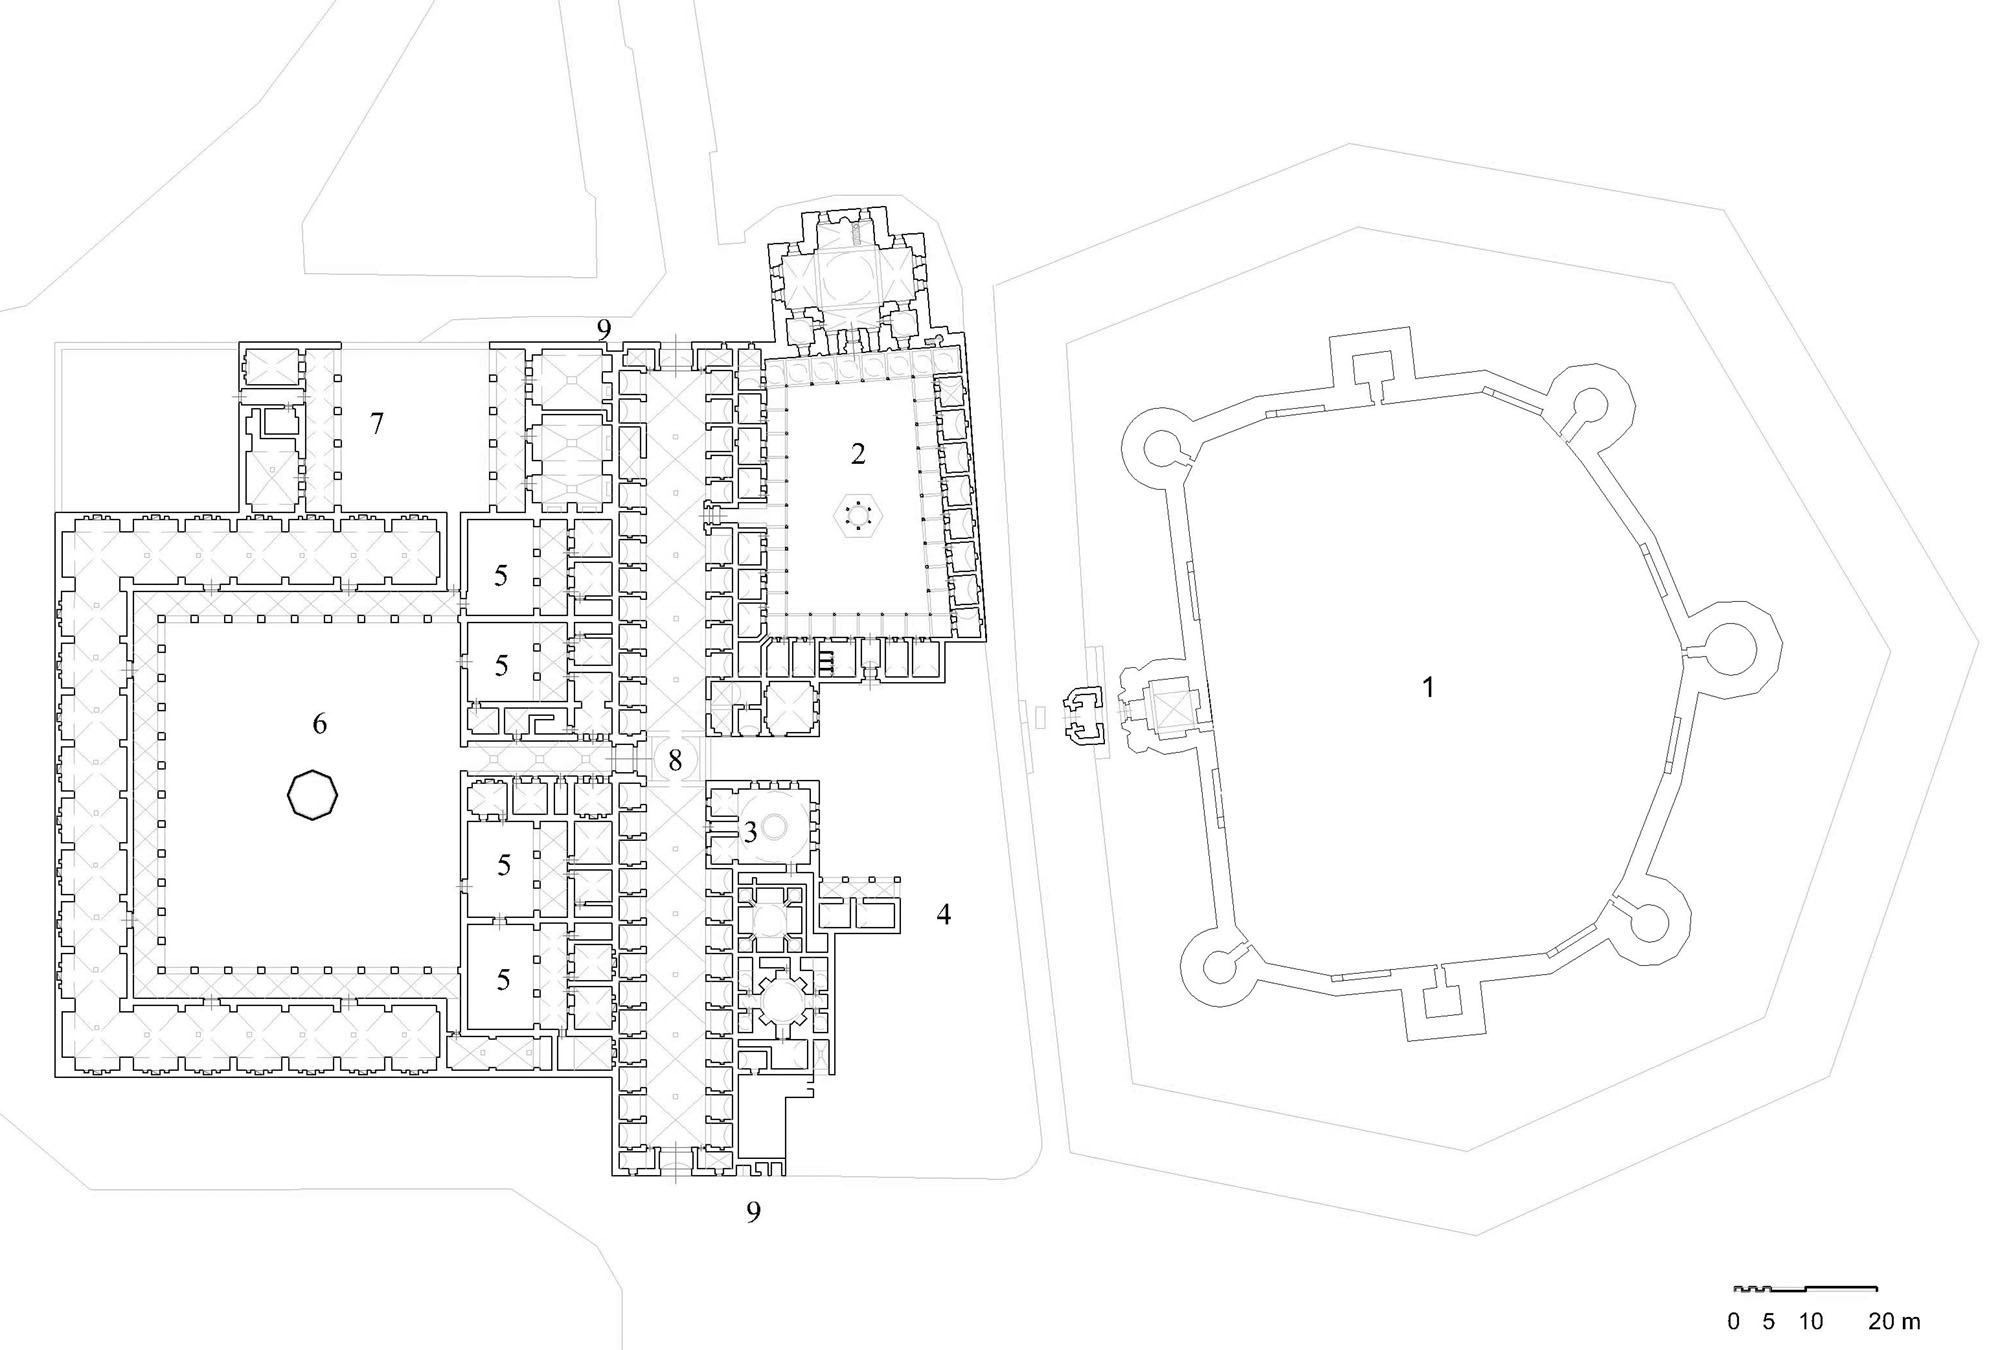 Floor plan of complex showing (1) fortress, (2) mosque and convent courtyard, (3) bathhouse, (4) elementary school (hypothetical reconstruction), (5) guestrooms with private courts, (6) caravanserai with stables, (7) hospice, (8) prayer dome, (9) public fountains